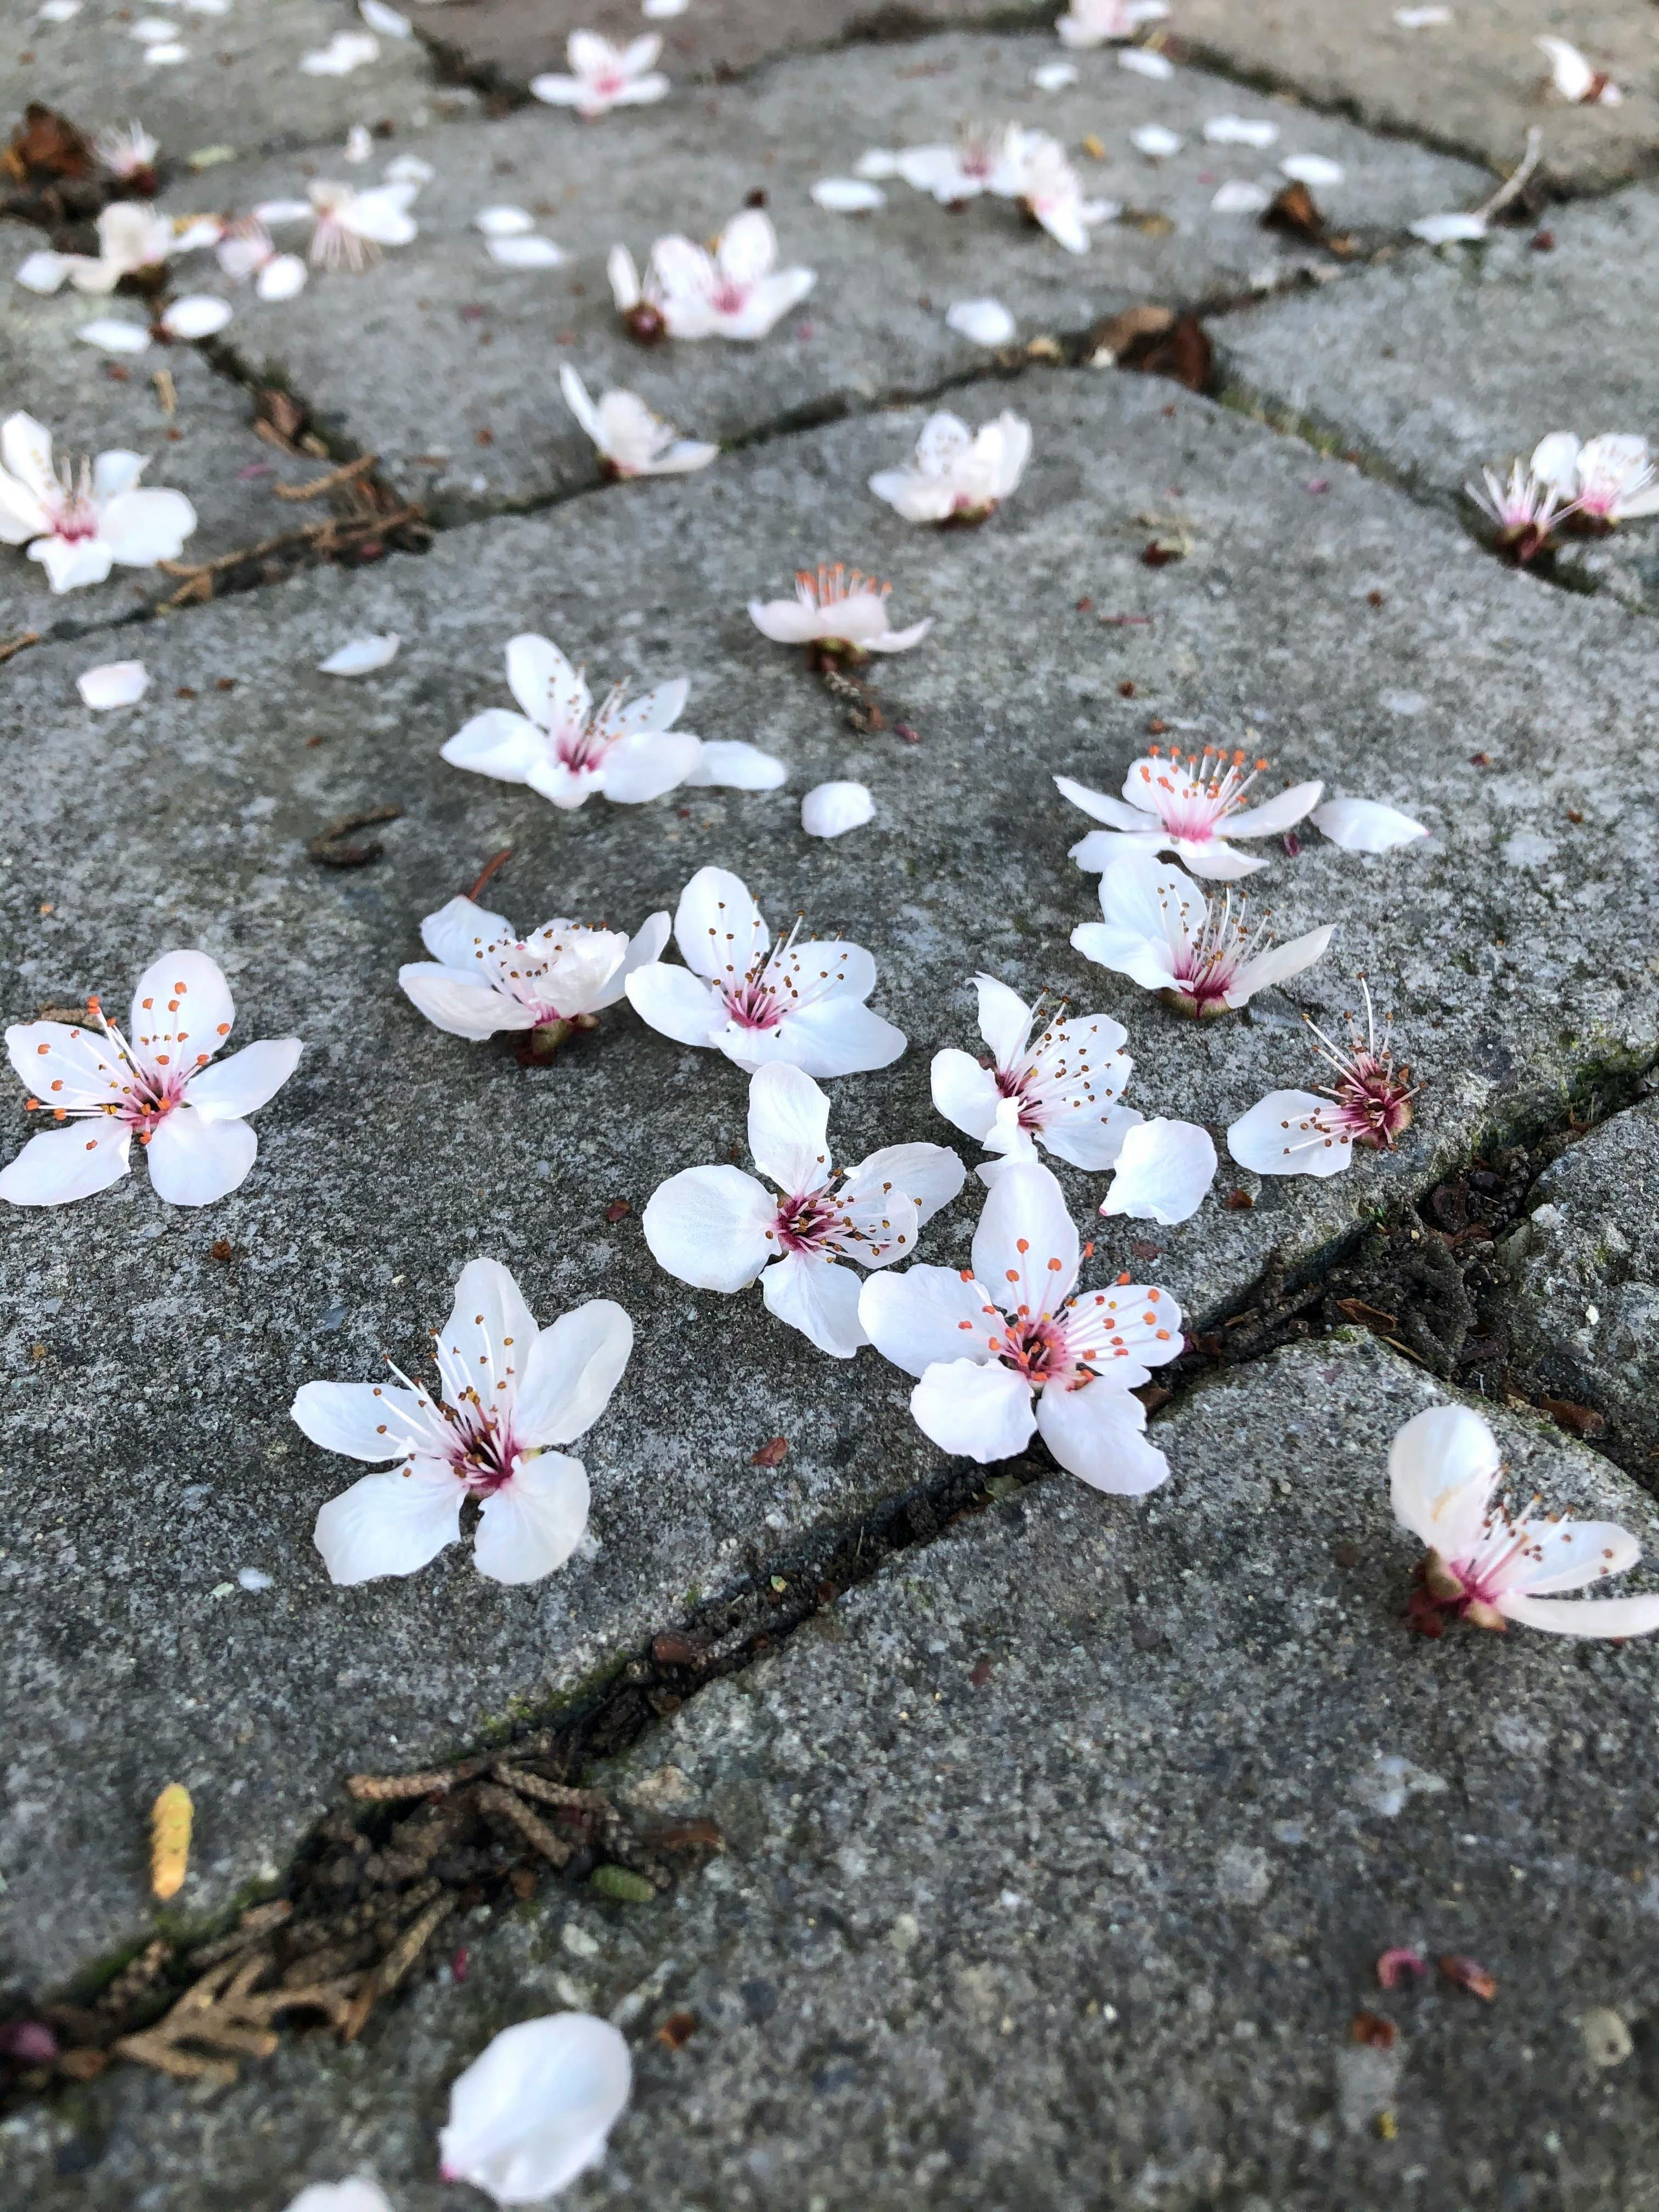 A Close-Up Shot of Cherry Blossoms on the Ground · Free Stock Photo